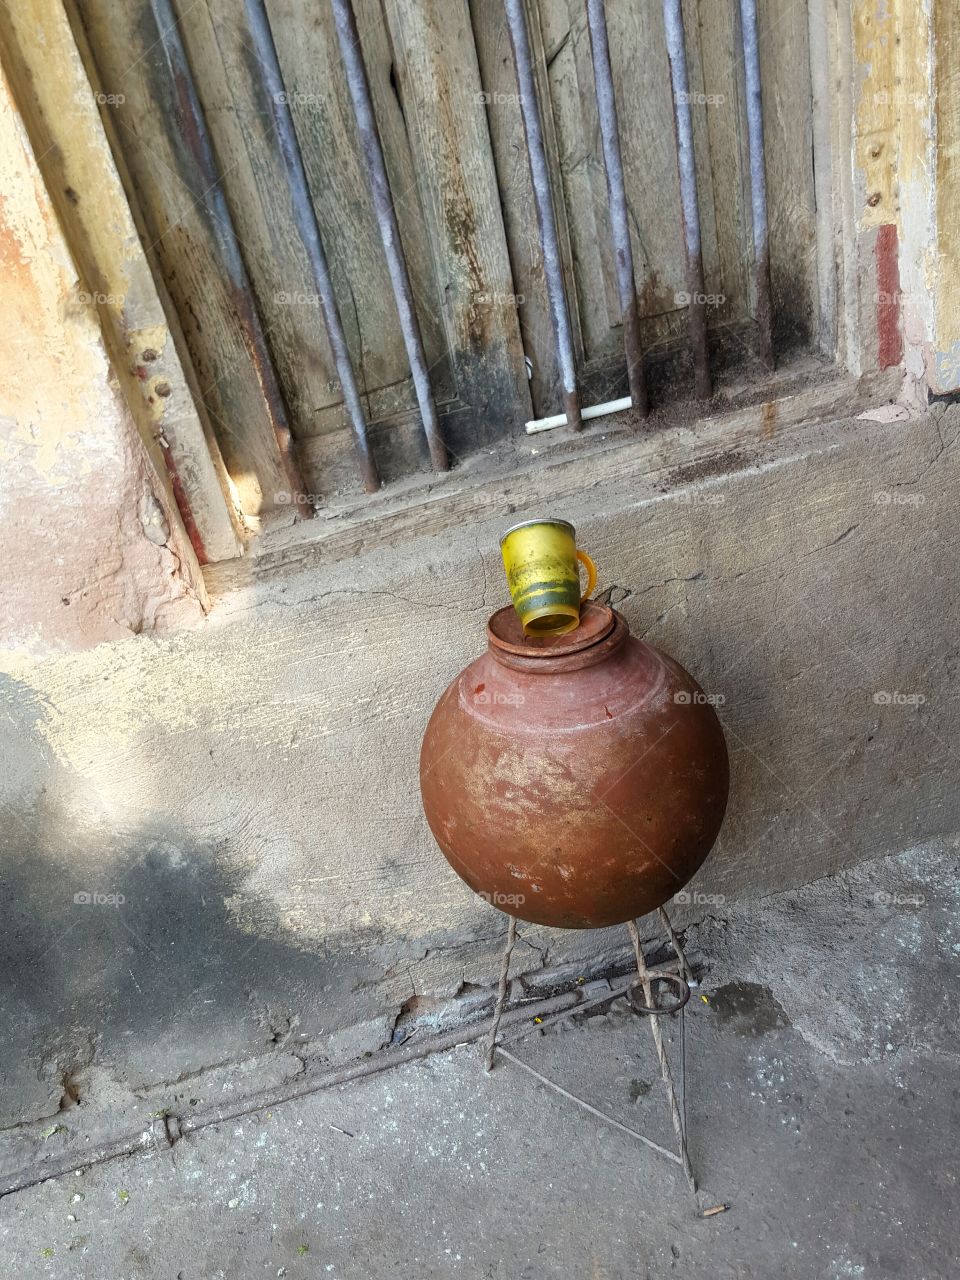 Earthen Indian Clay pot for water with yellow mug and window in the background